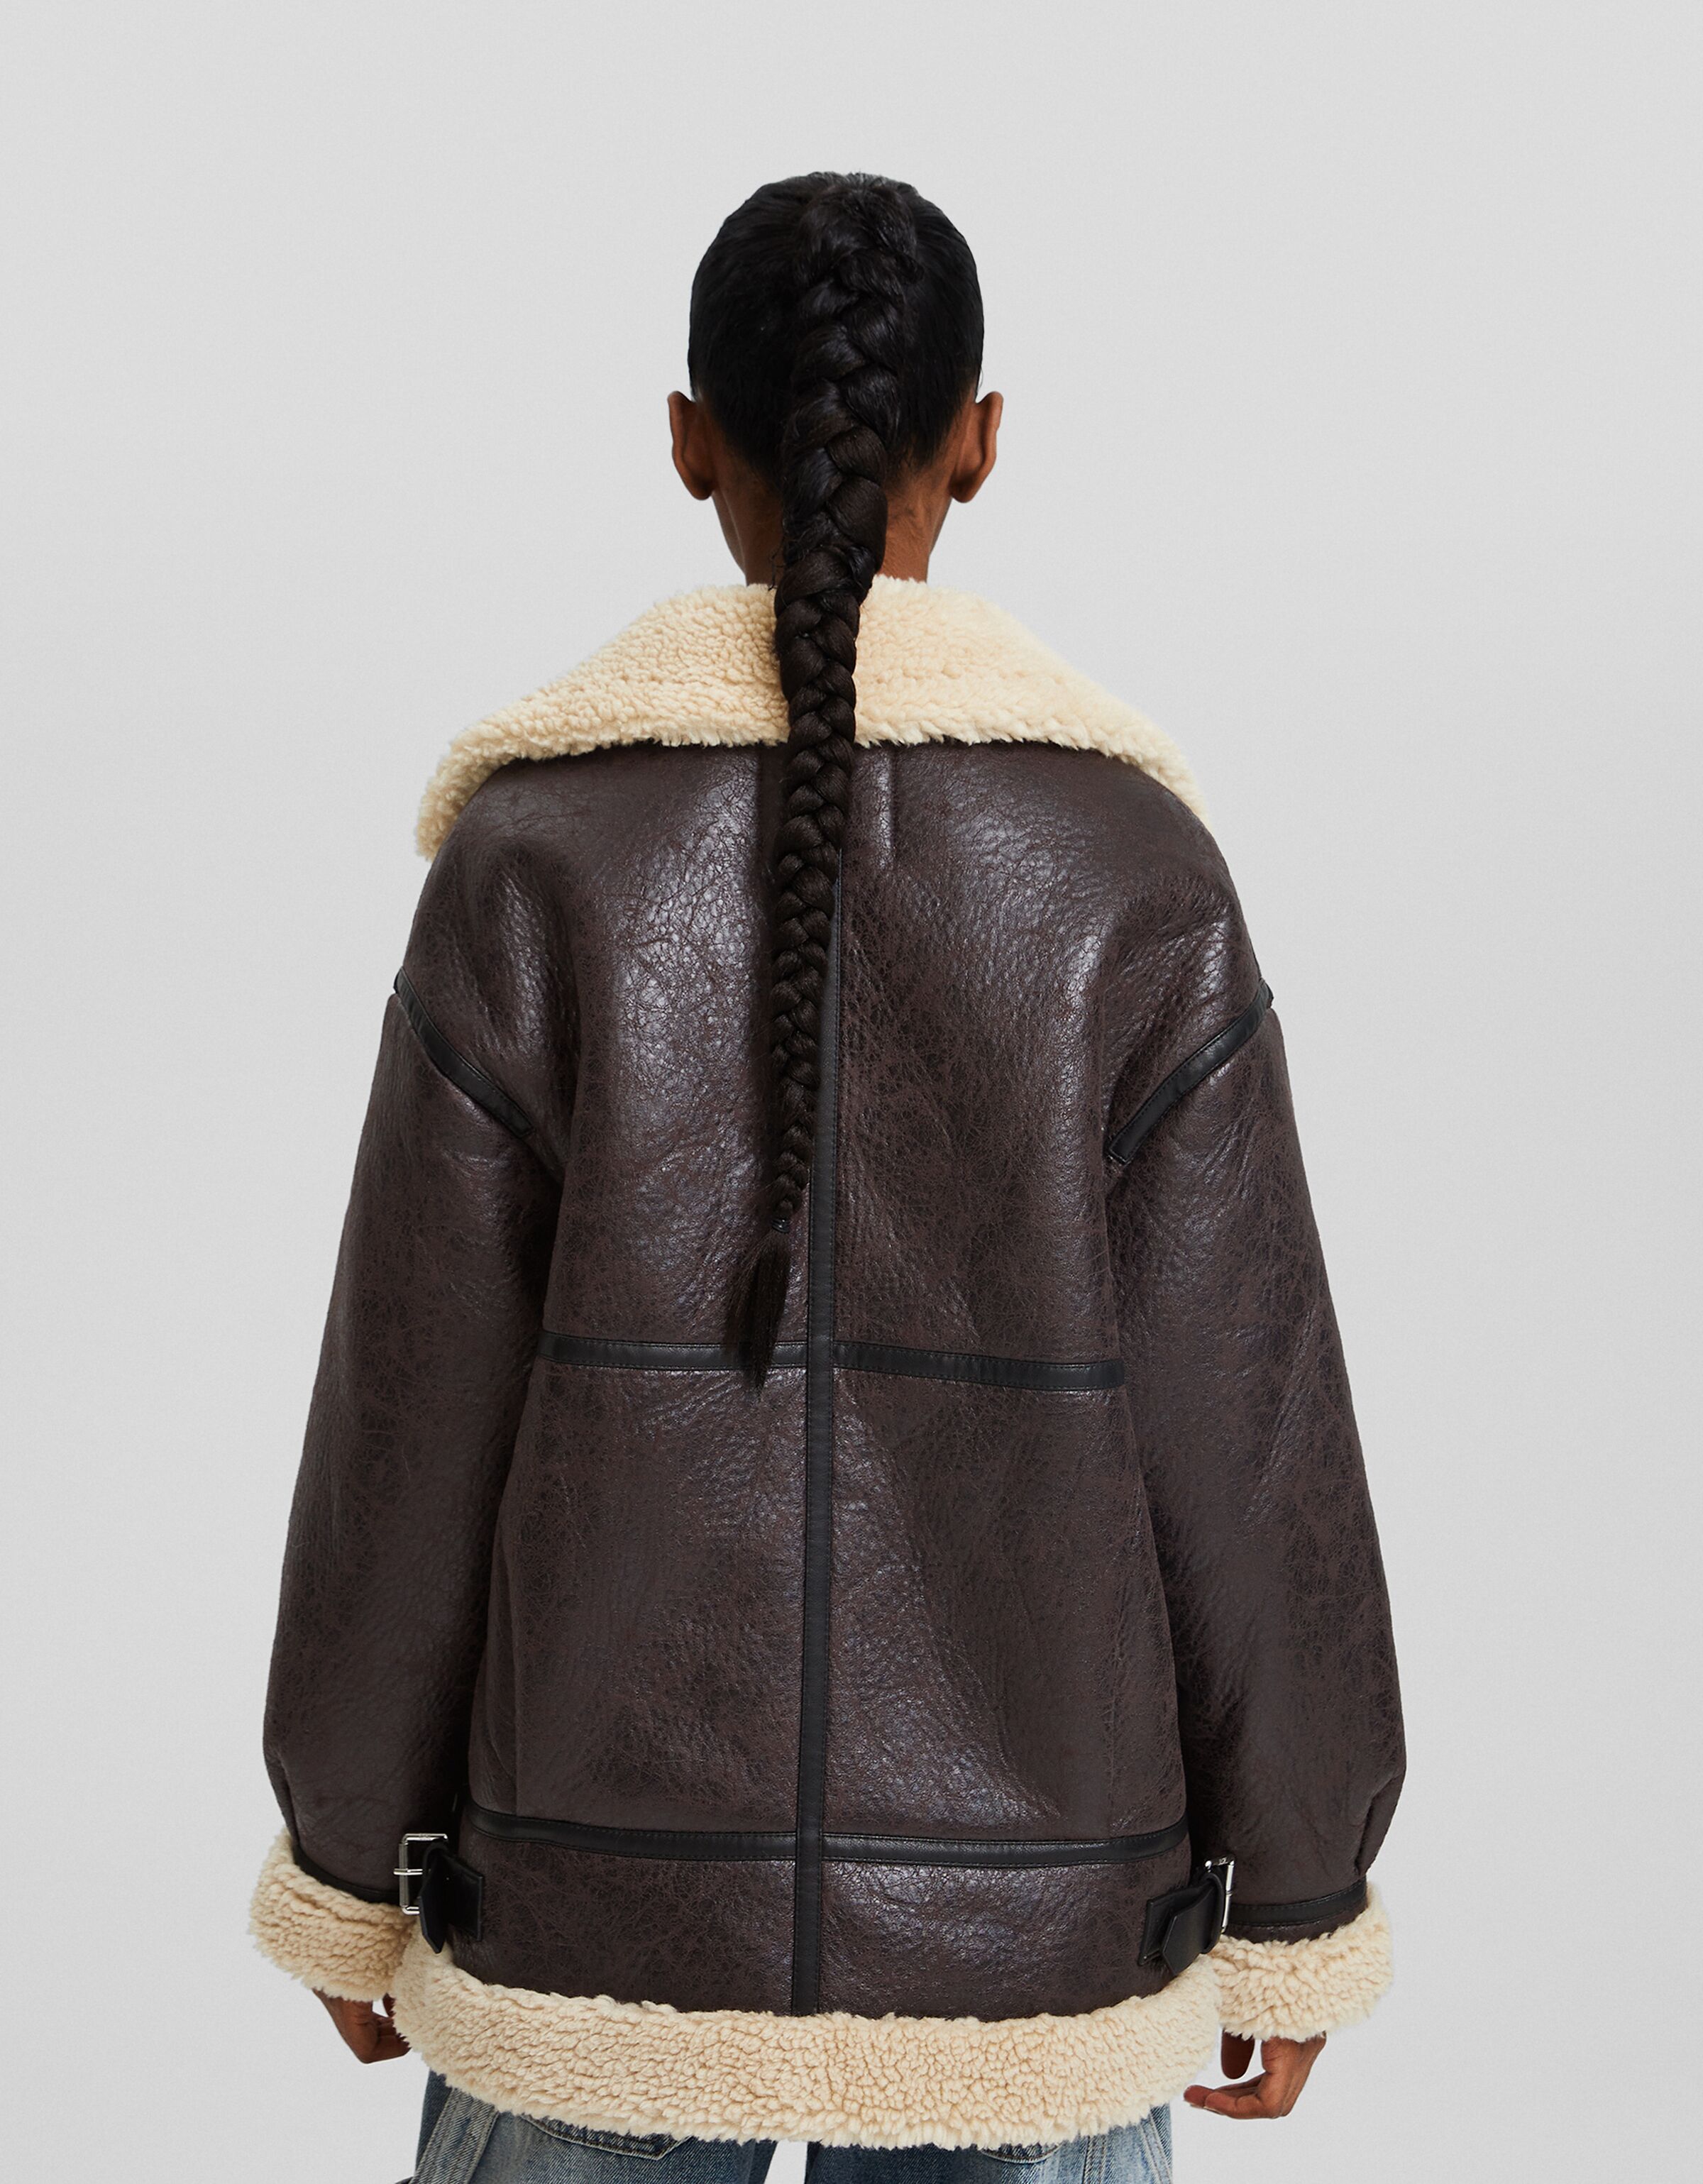 Bellivera Women Double Sided Faux Fur Jacket with Fur Collar, The Puffer  Coat Worn on Both Sides